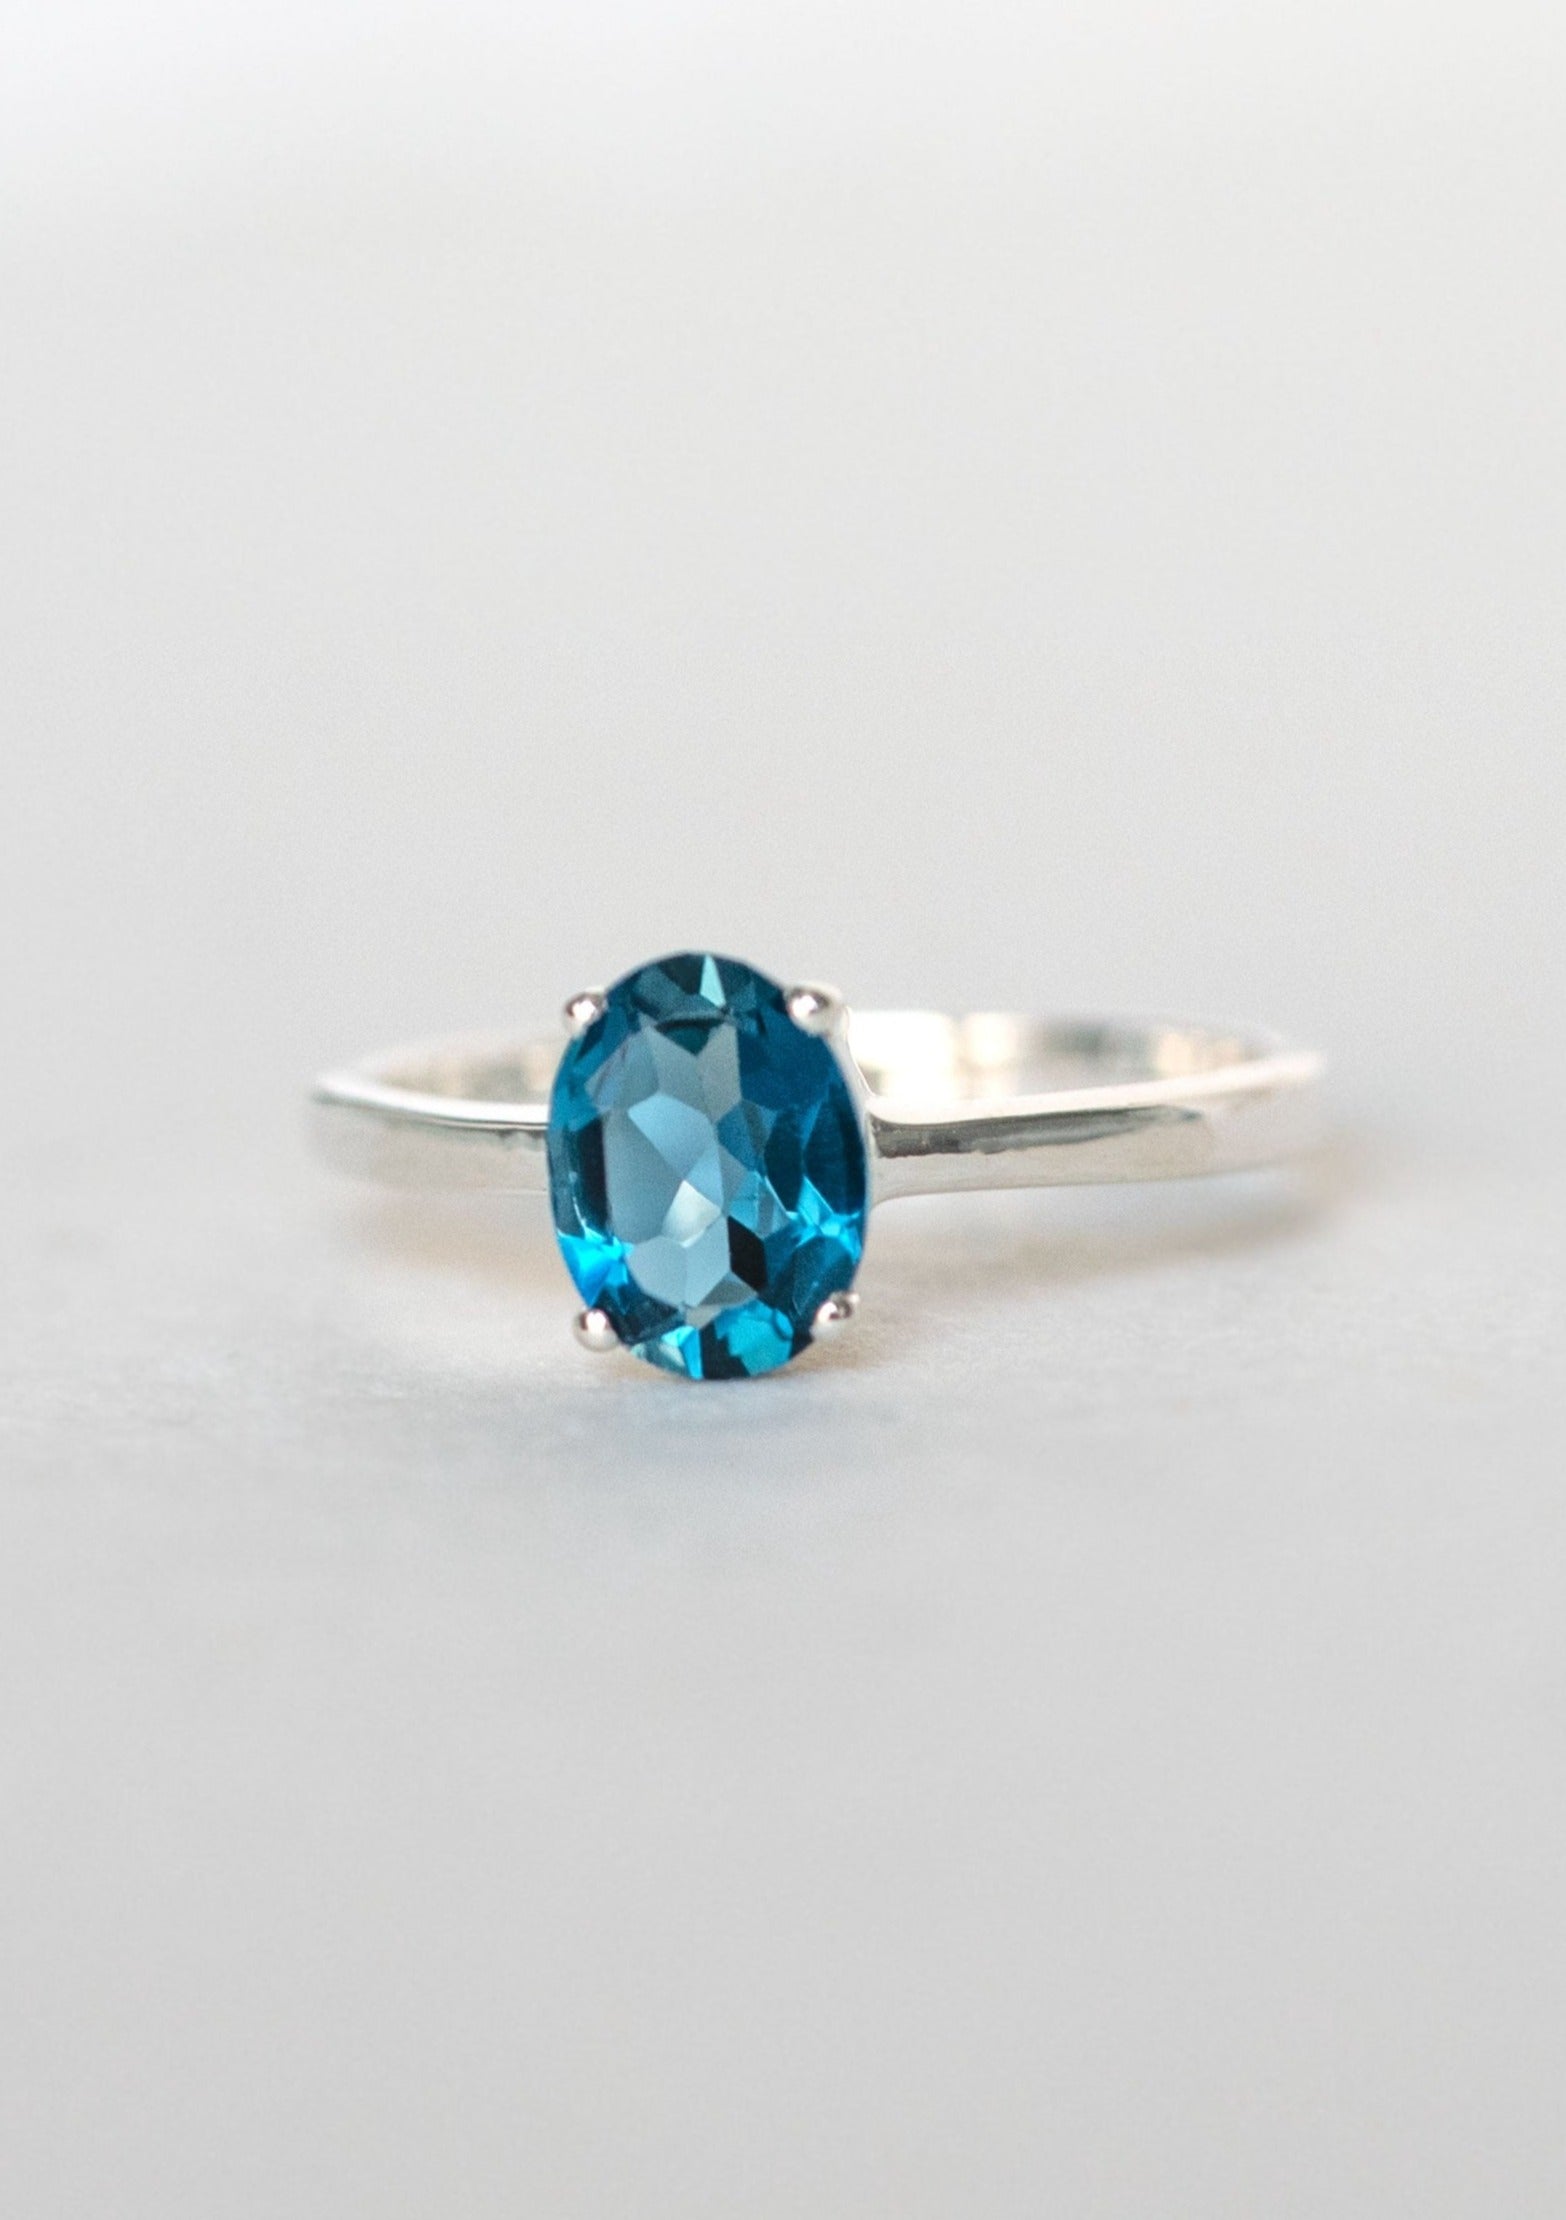 Genuine London Blue Topaz Ring in 925 Sterling Silver, Handmade Oval Solitaire Rings, Gifts for Women Christmas, December Birthstone, Birthday Gift